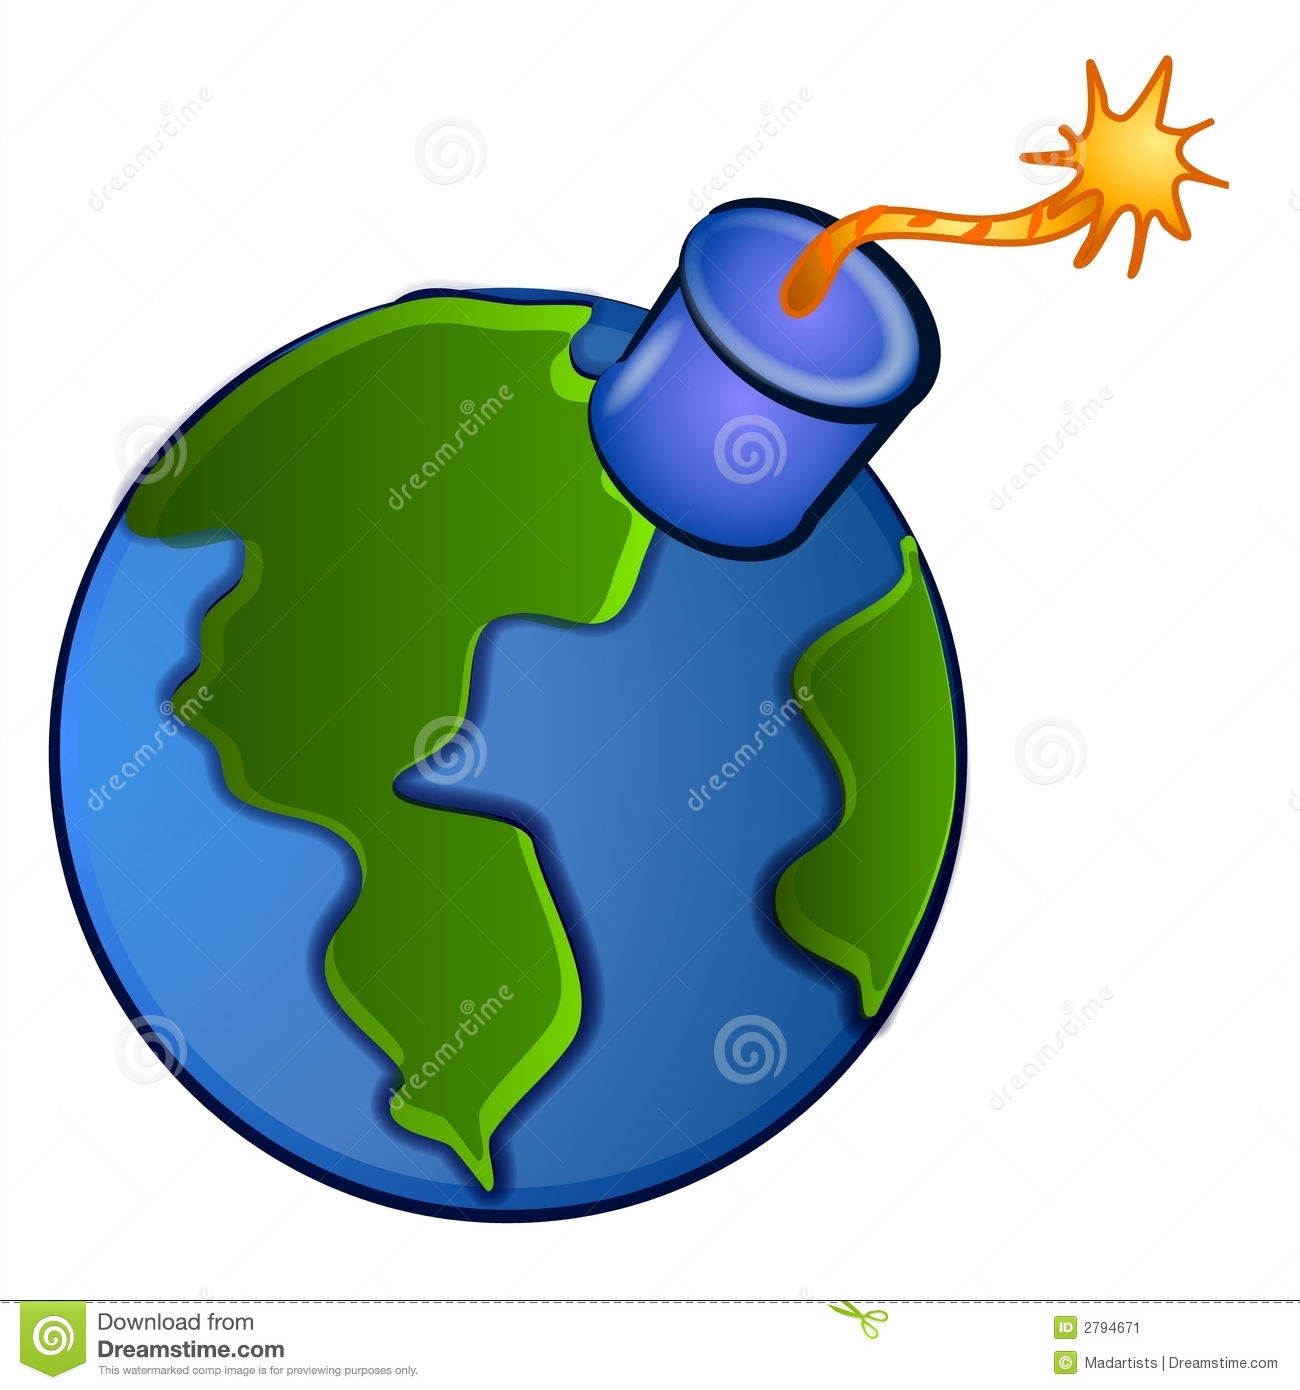 Bomb Blowing Up Clipart.